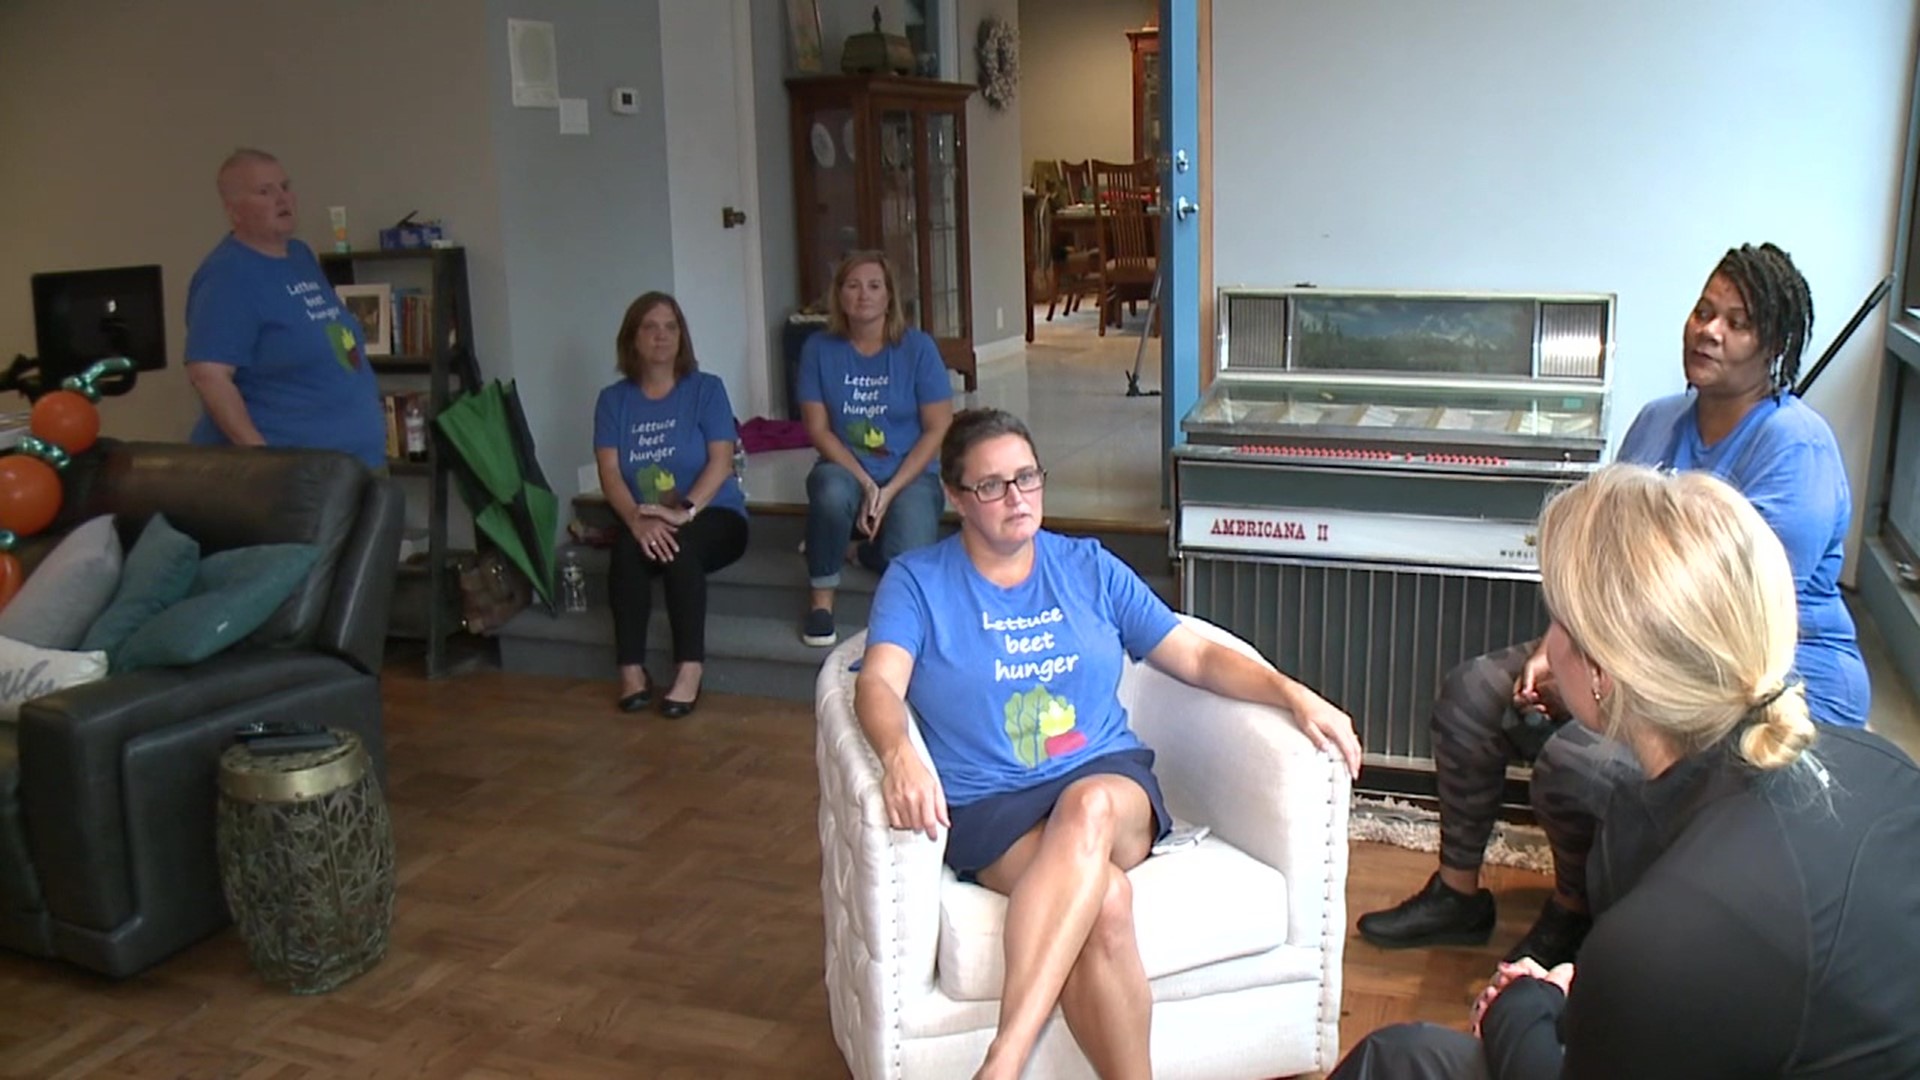 Volunteers provide food to hundreds of those in need in Luzerne County.